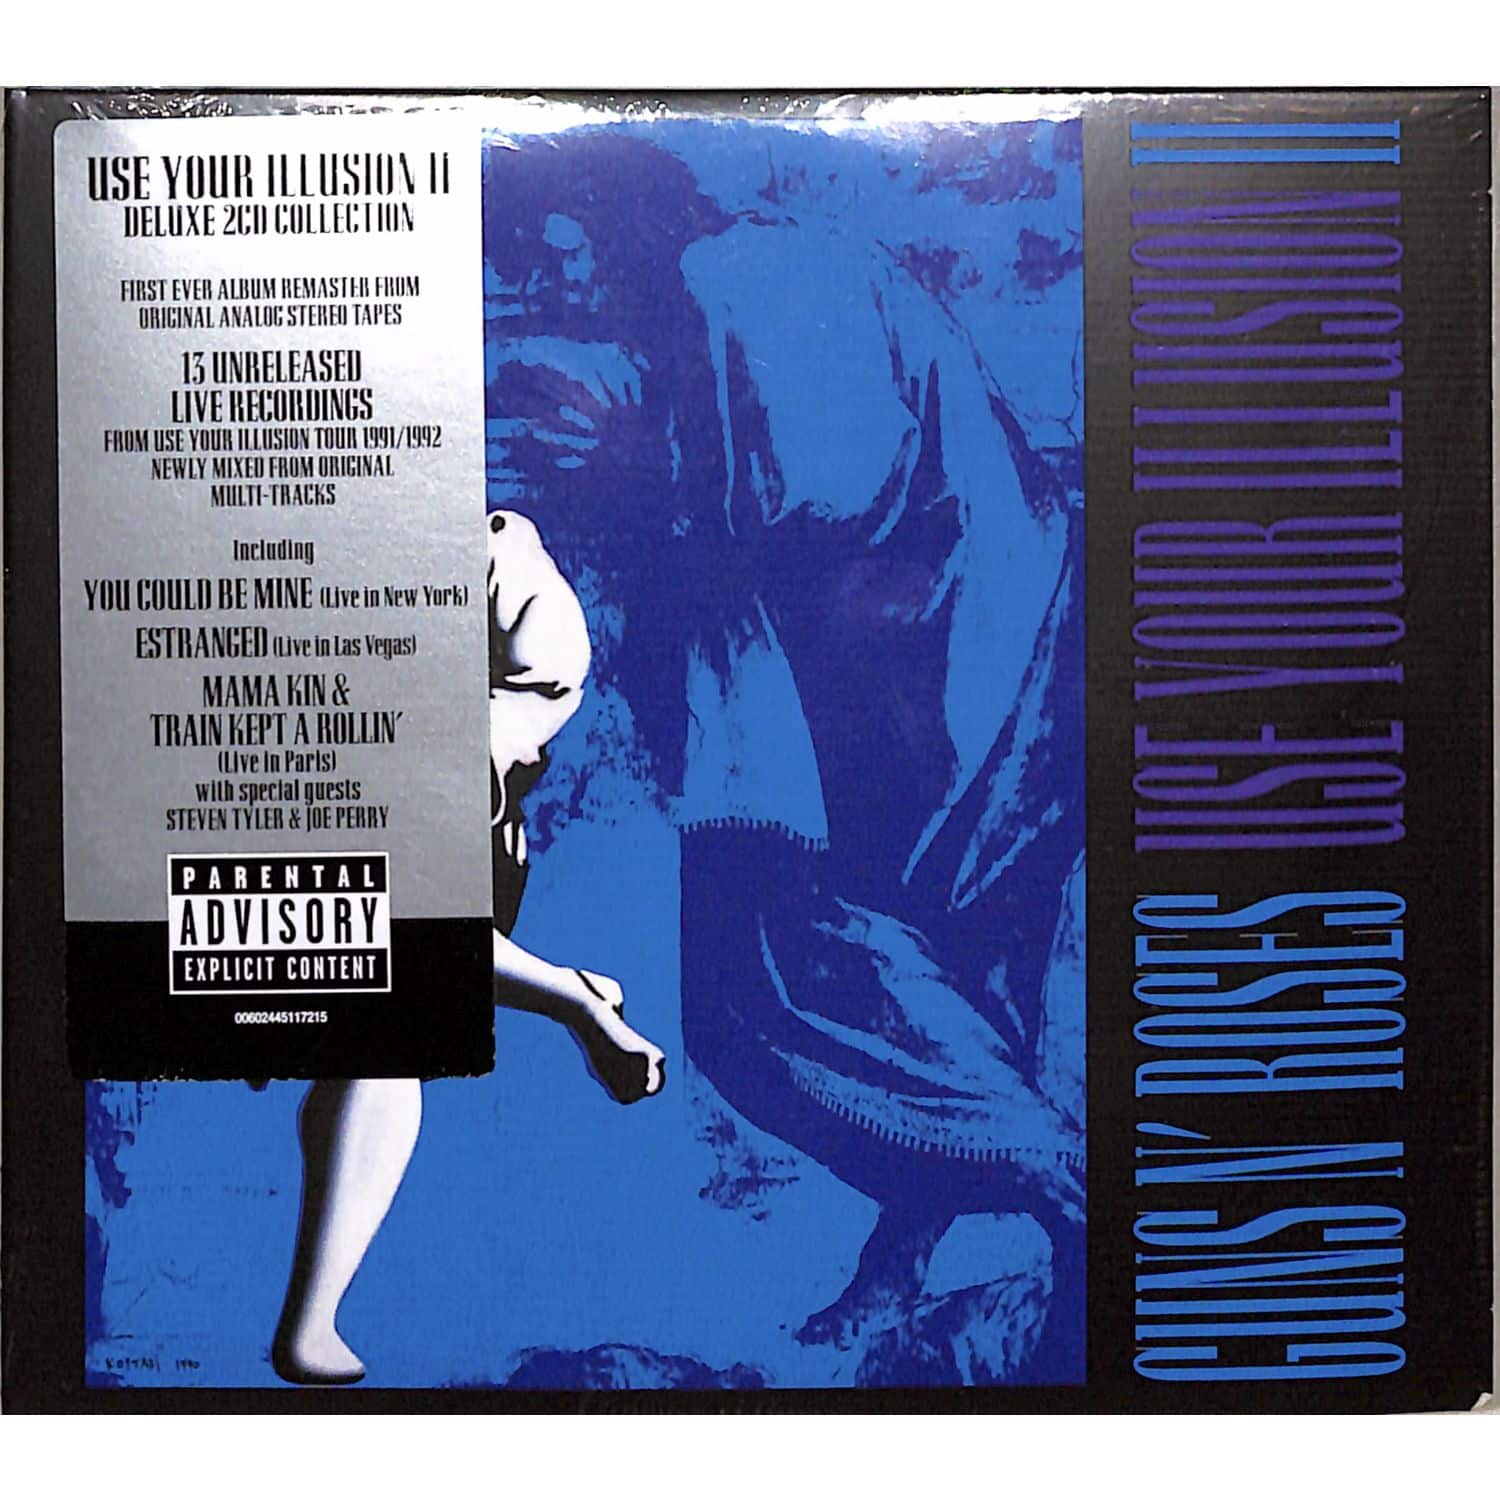 GUNS N ROSES - USE YOUR ILLUSION II 